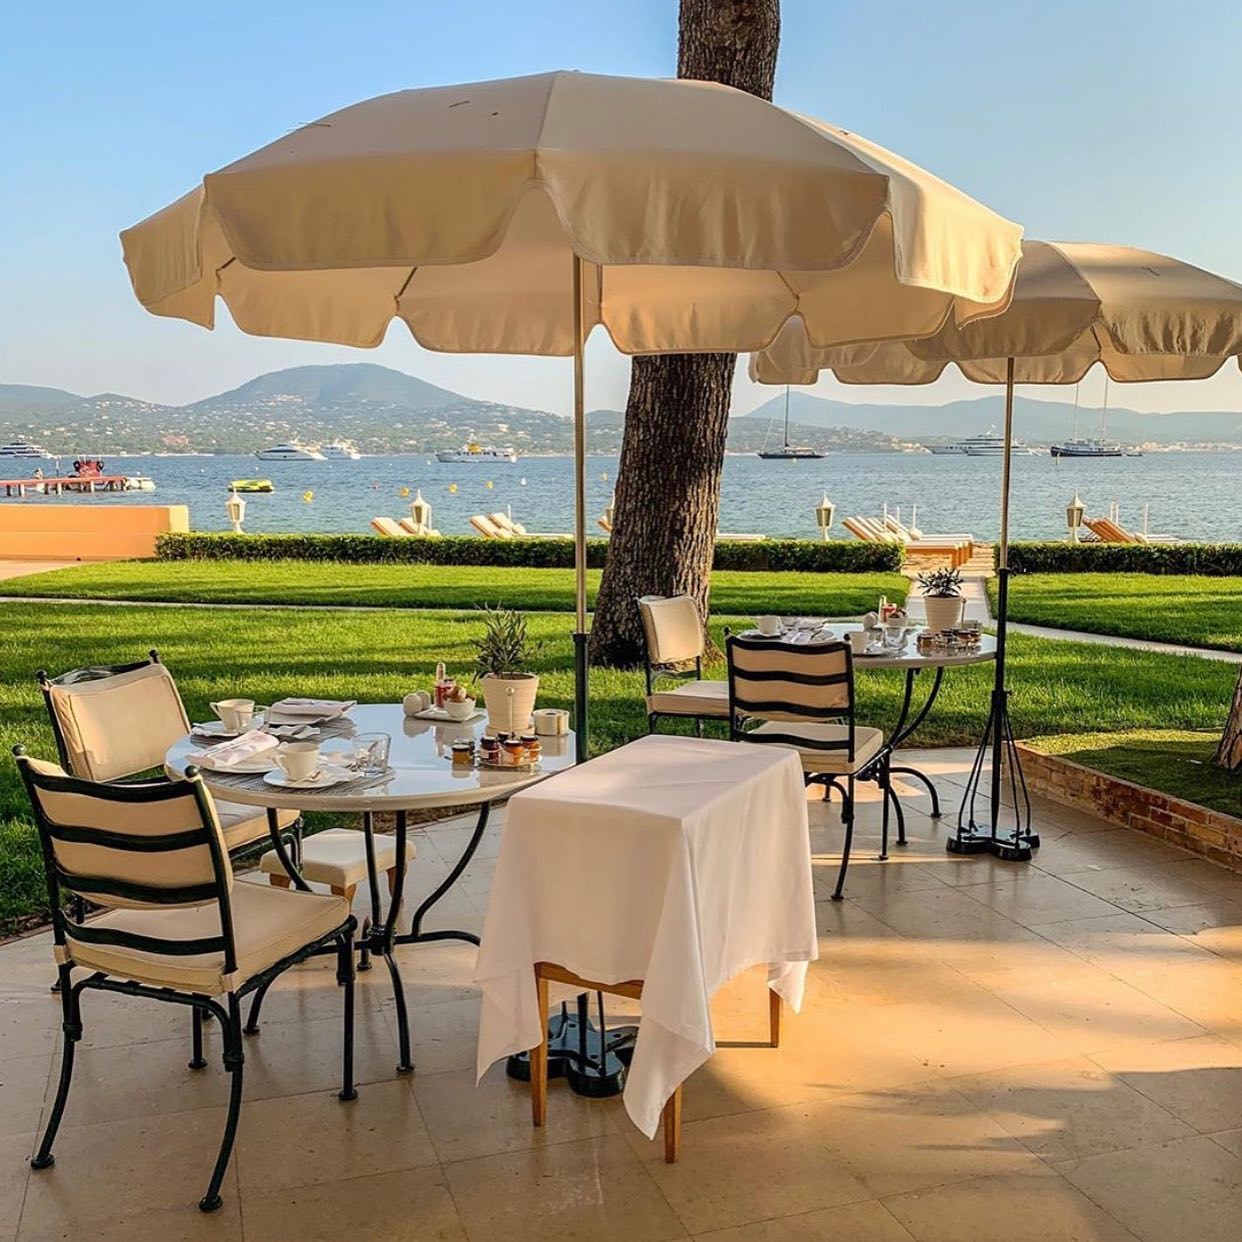 La Terrasse at the Cheval Blanc Hotel in St. Tropez presents a chic and sophisticated dining experience with stunning sea views